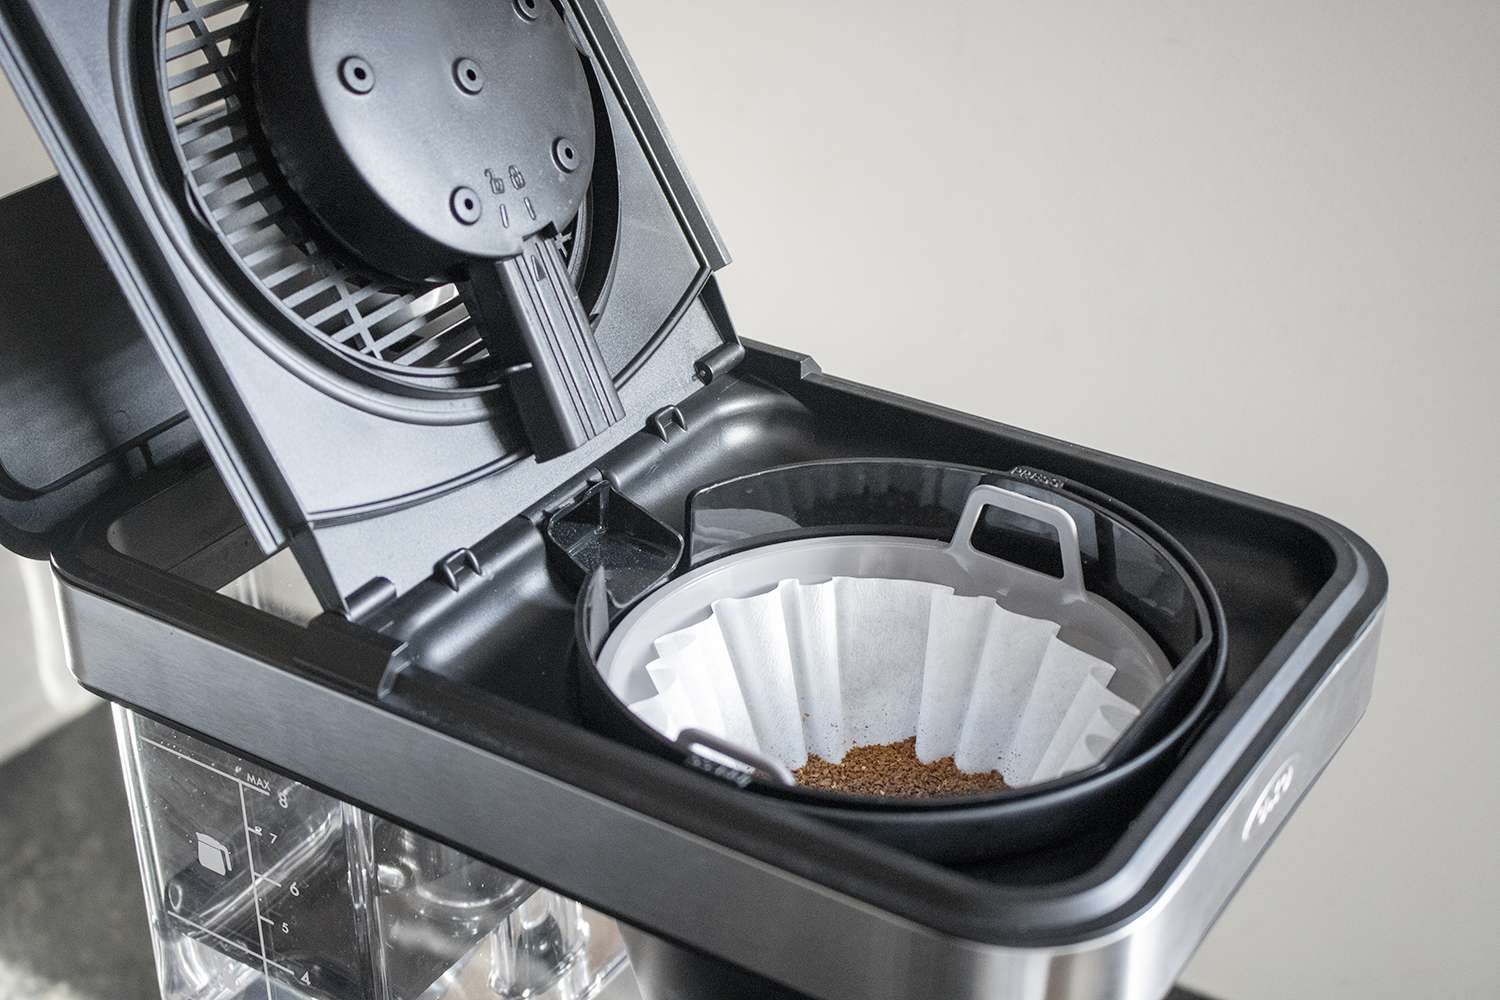 A look at the OXO 8-Cup's brewing basket with coffee in it